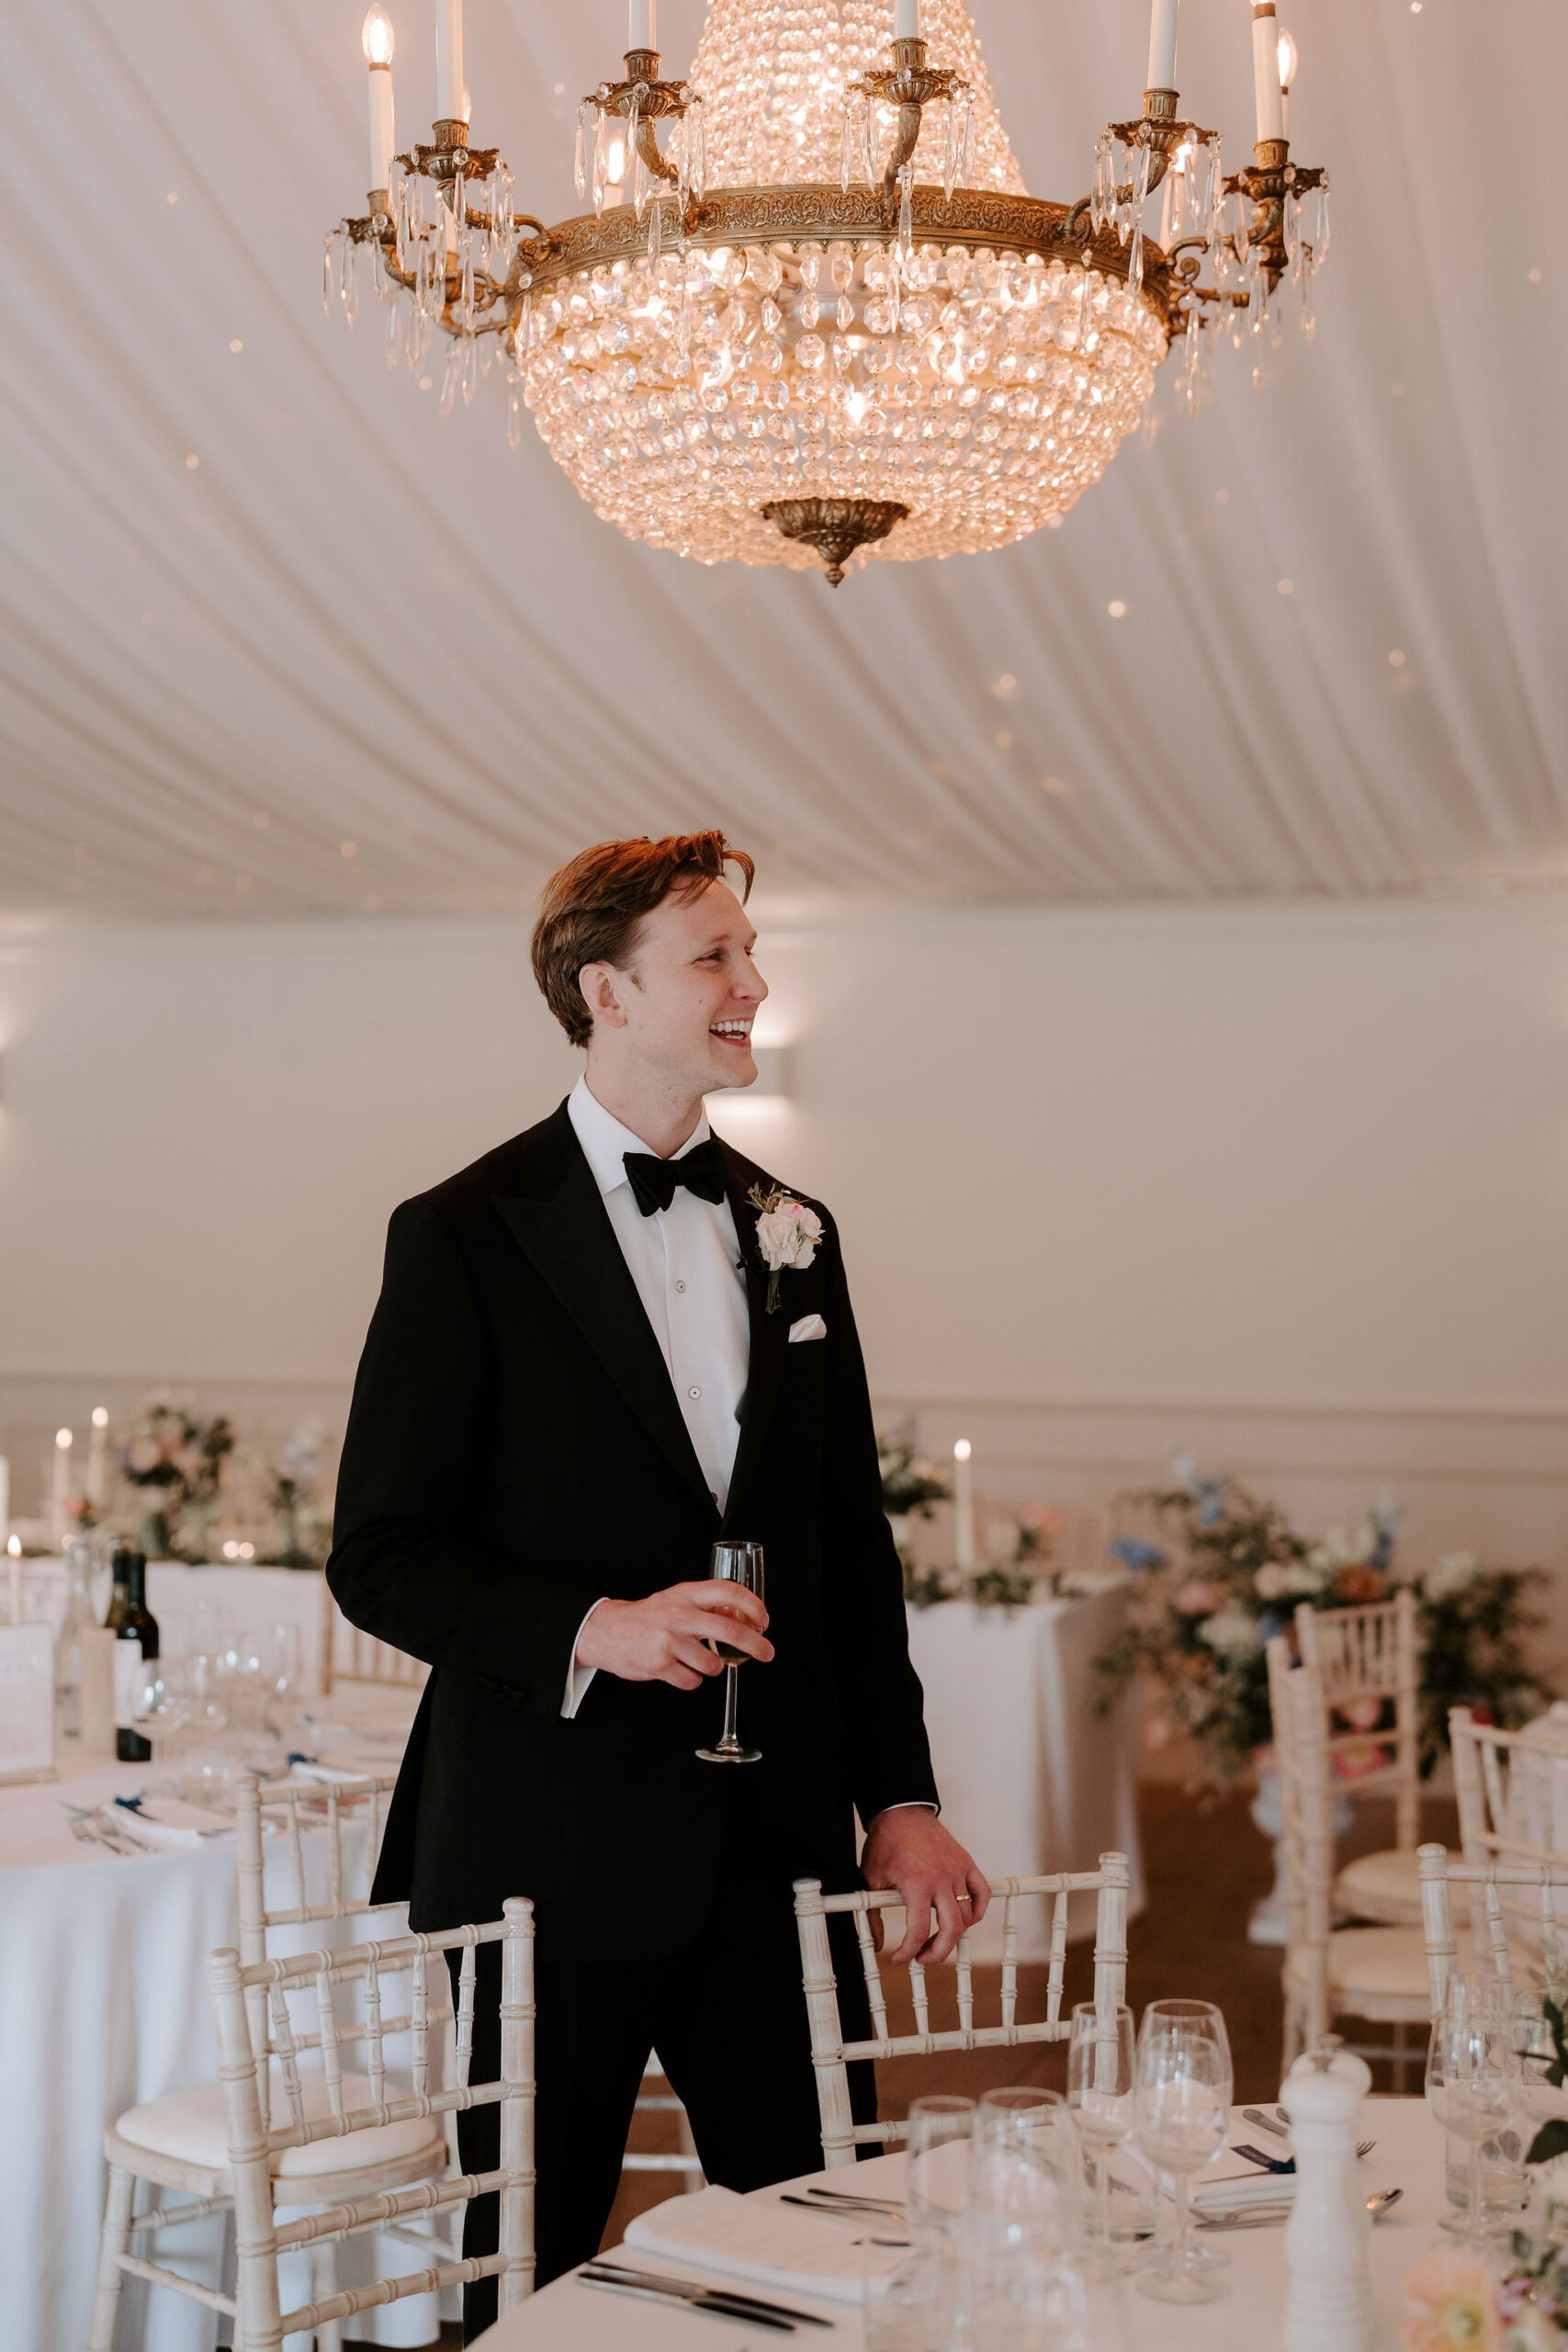 A groom in black tie stands underneath a chandelier in a marquee that has been set up for a wedding reception